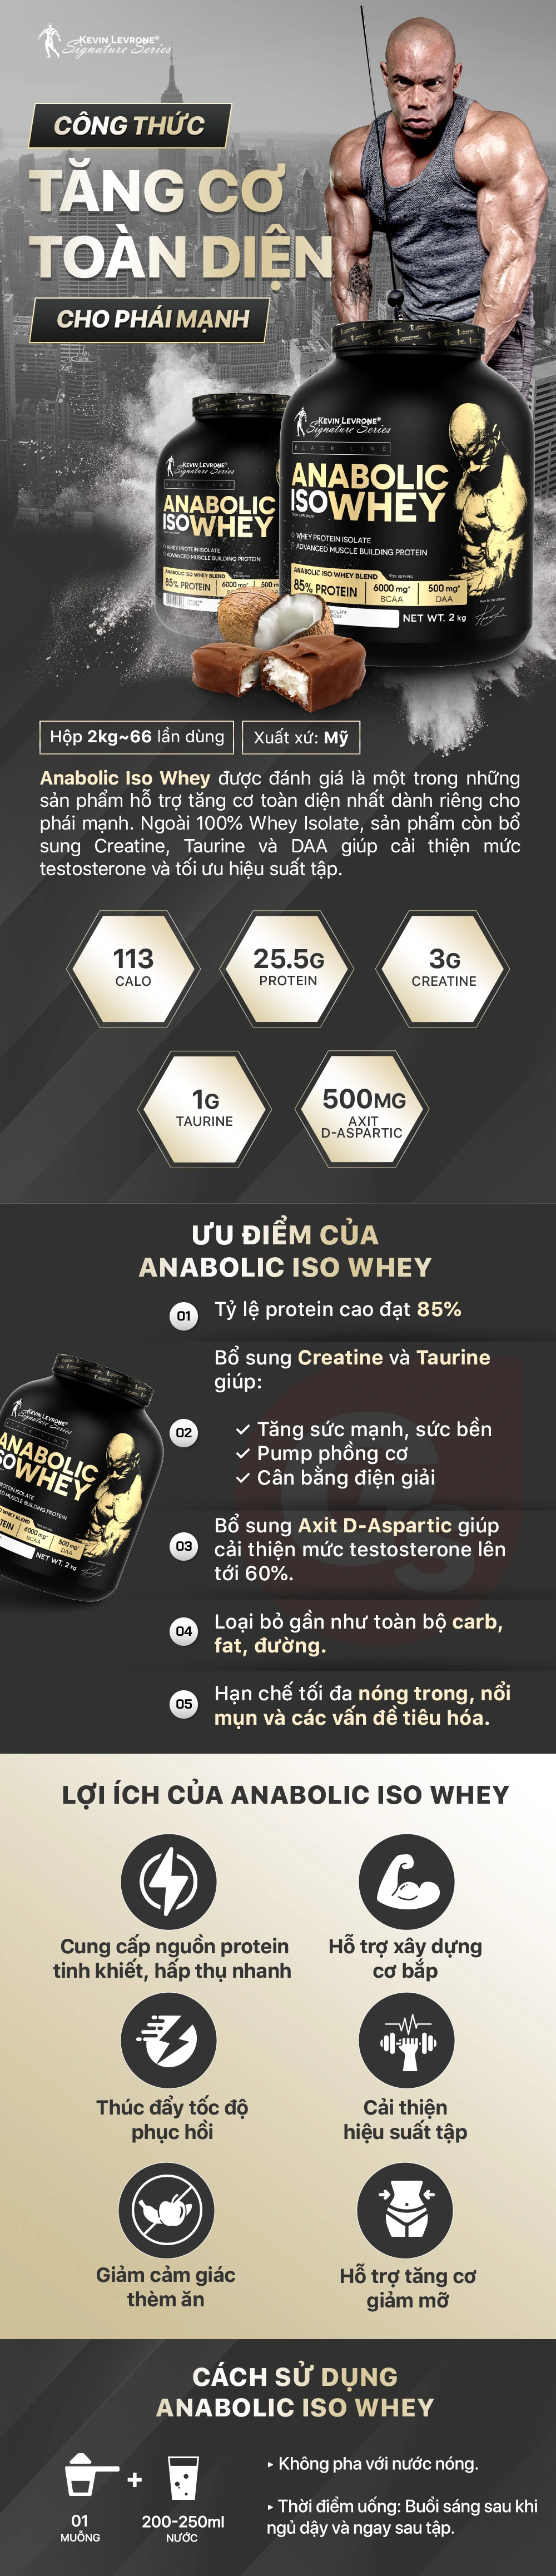 kevin-levrone-anabolic-iso-whey-ho-tro-tang-co-gymstore.webp